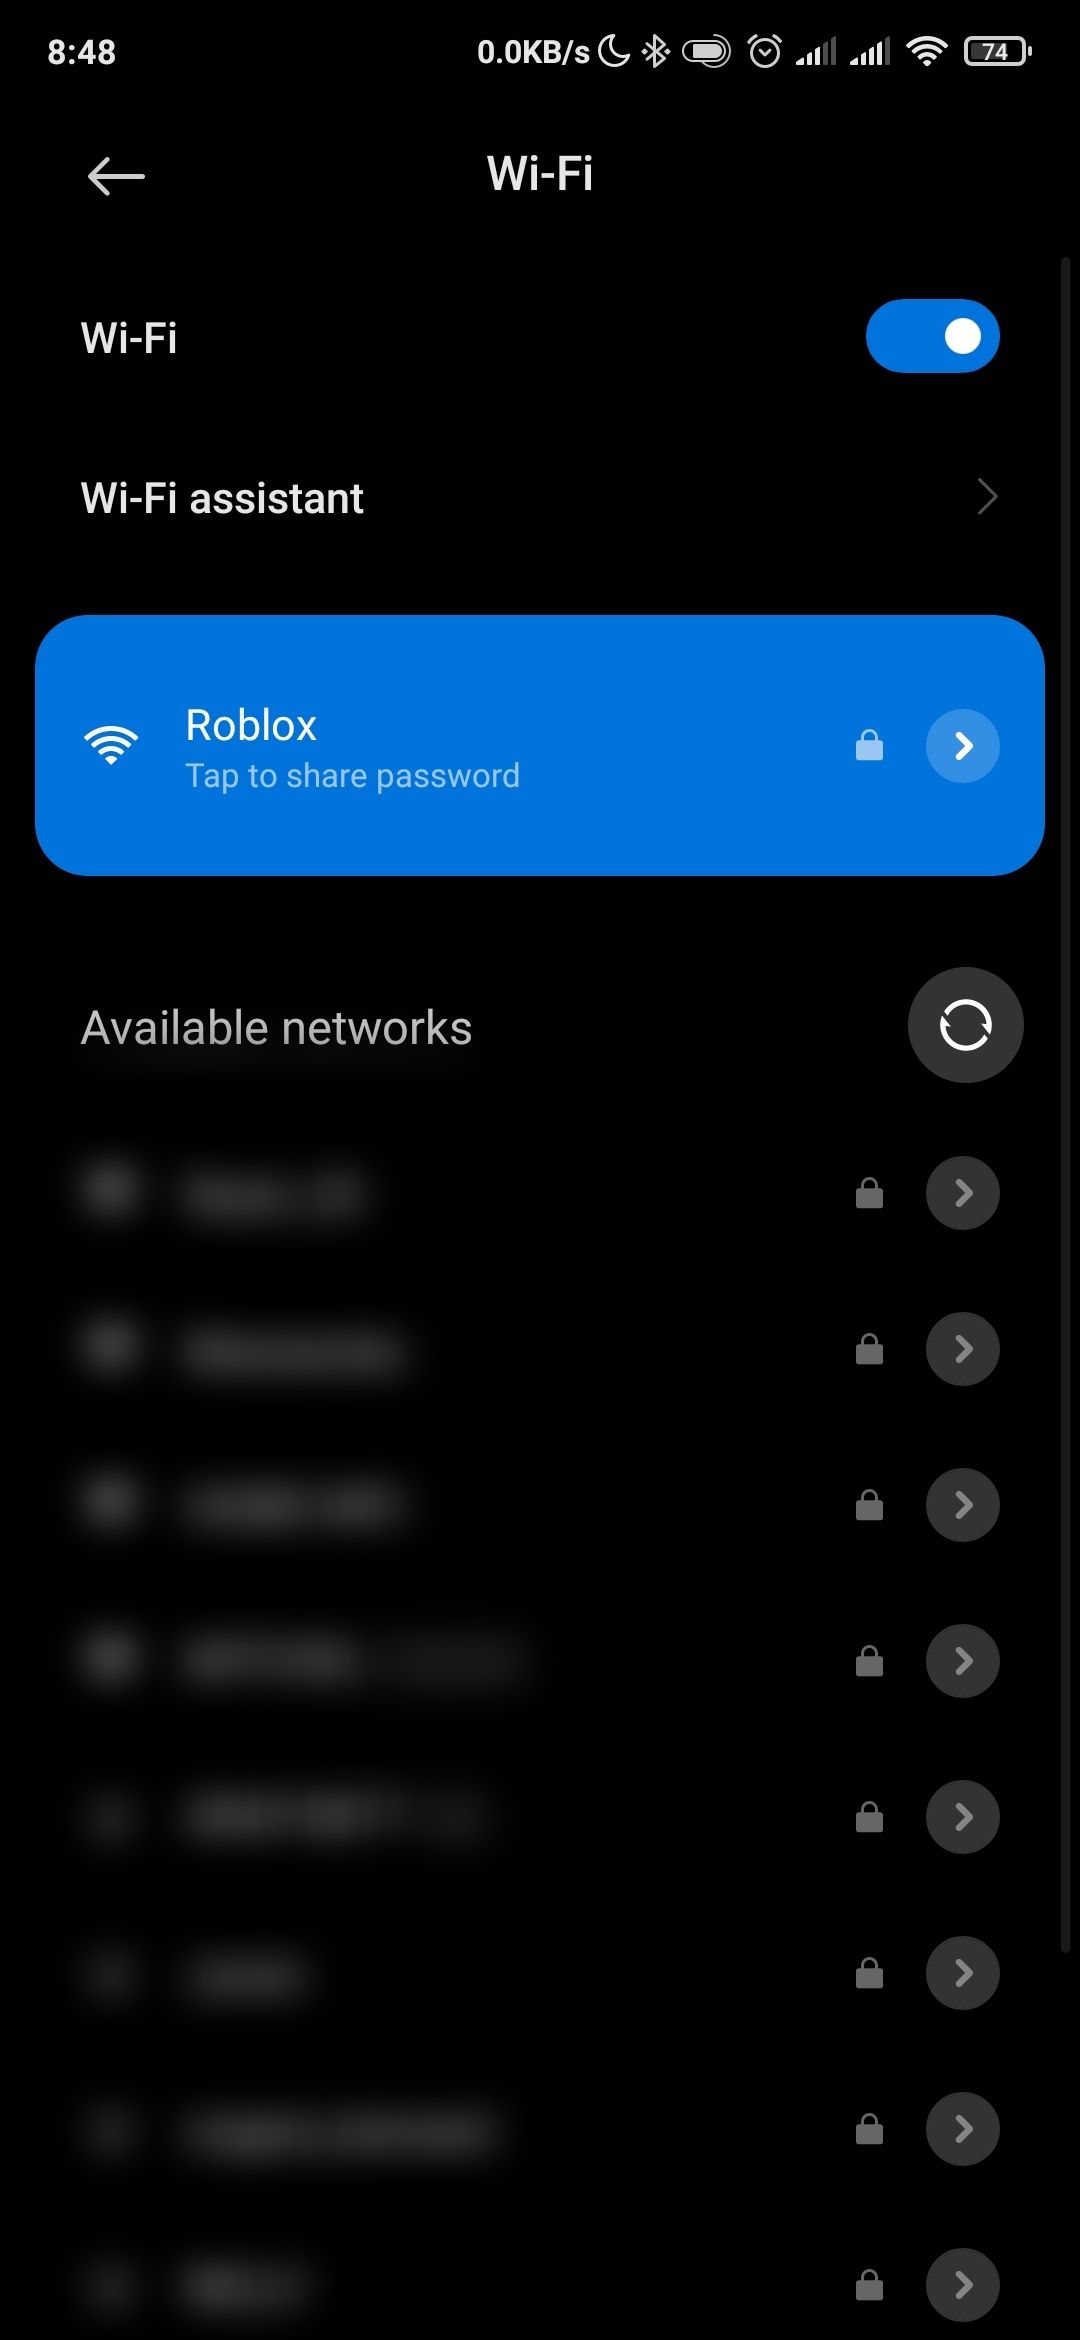 A connected hidden Wi-Fi network